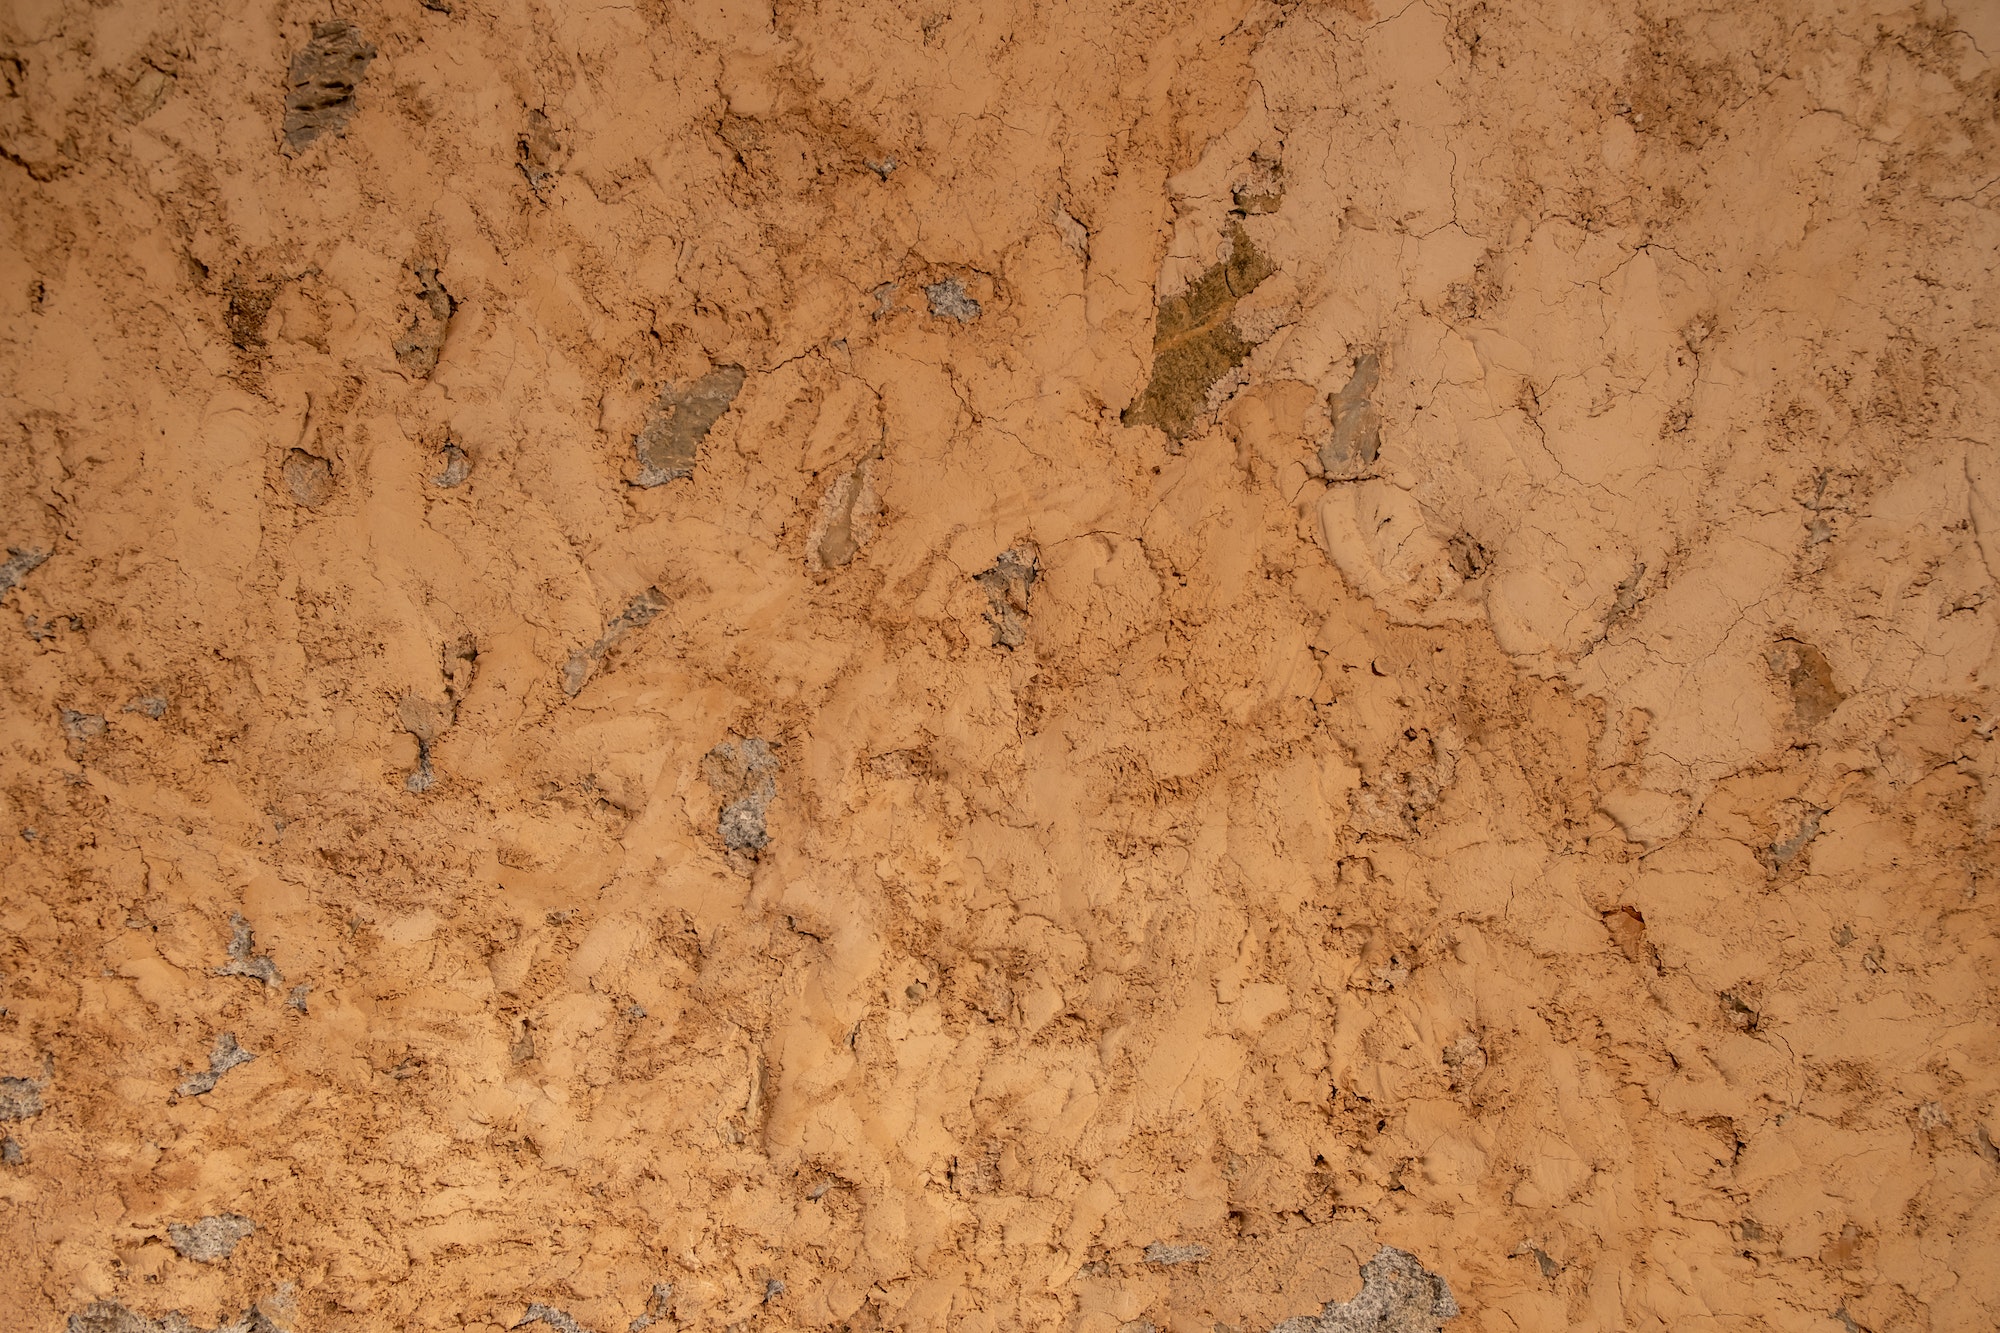 Mud plaster wall background texture. Dry brown empty soil ground, floor structure. Copy space.